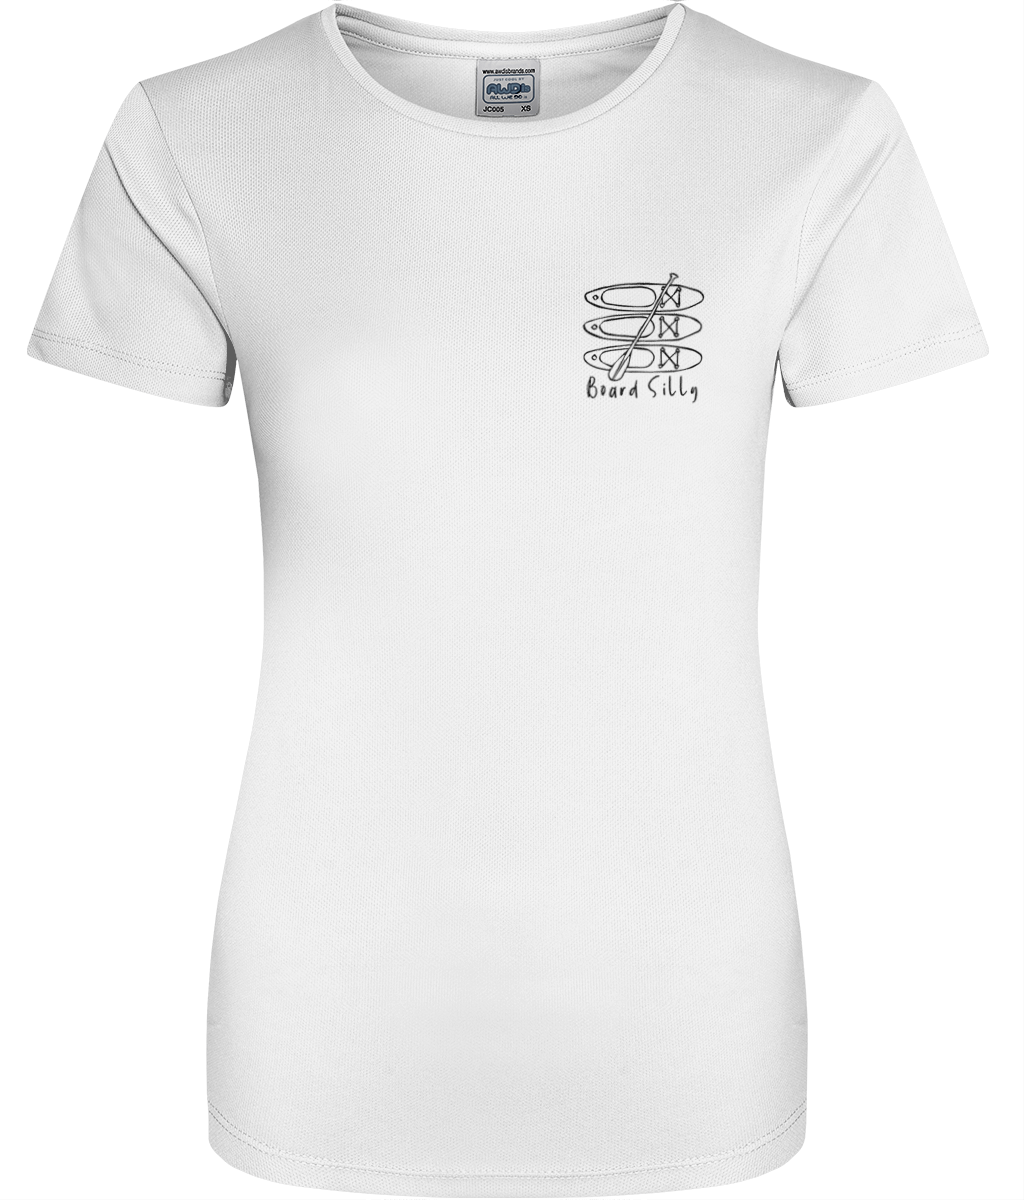 Women's Cool Active T-shirt, paddle board